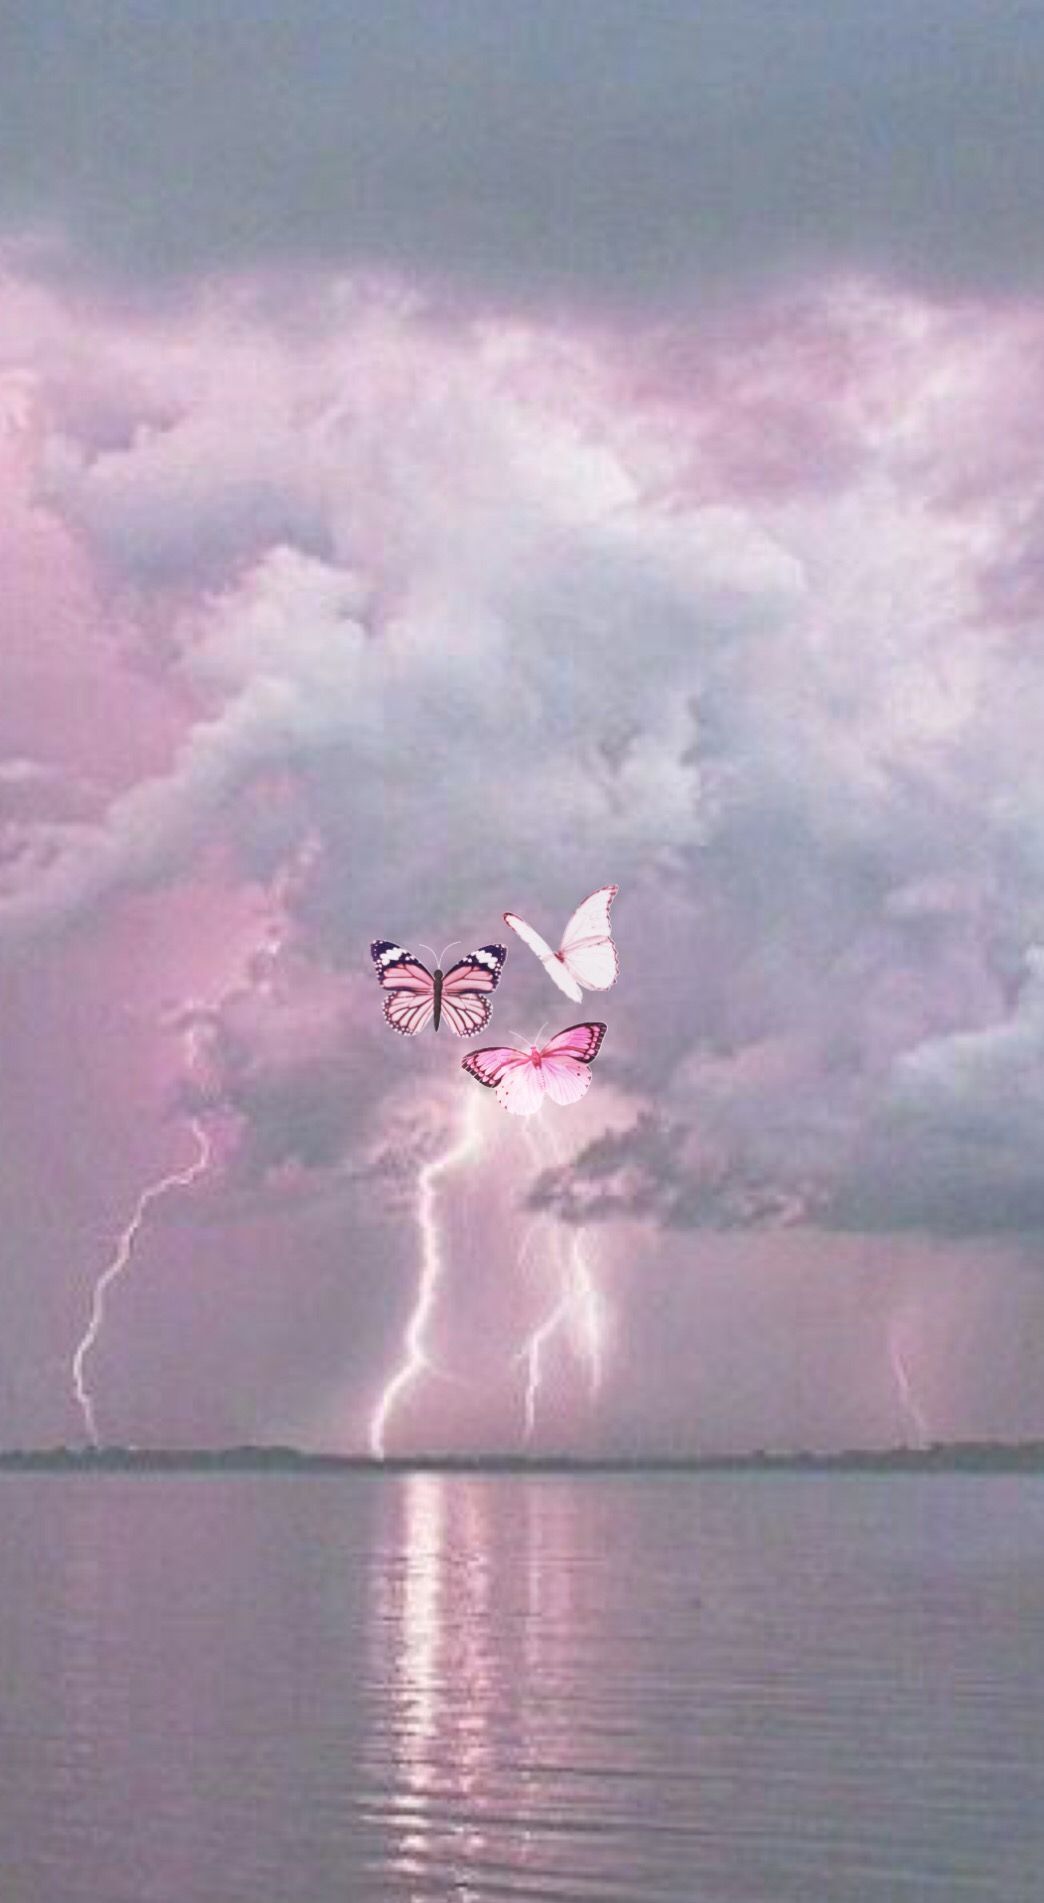 Aesthetic wallpaper with butterfly in the sky - Storm